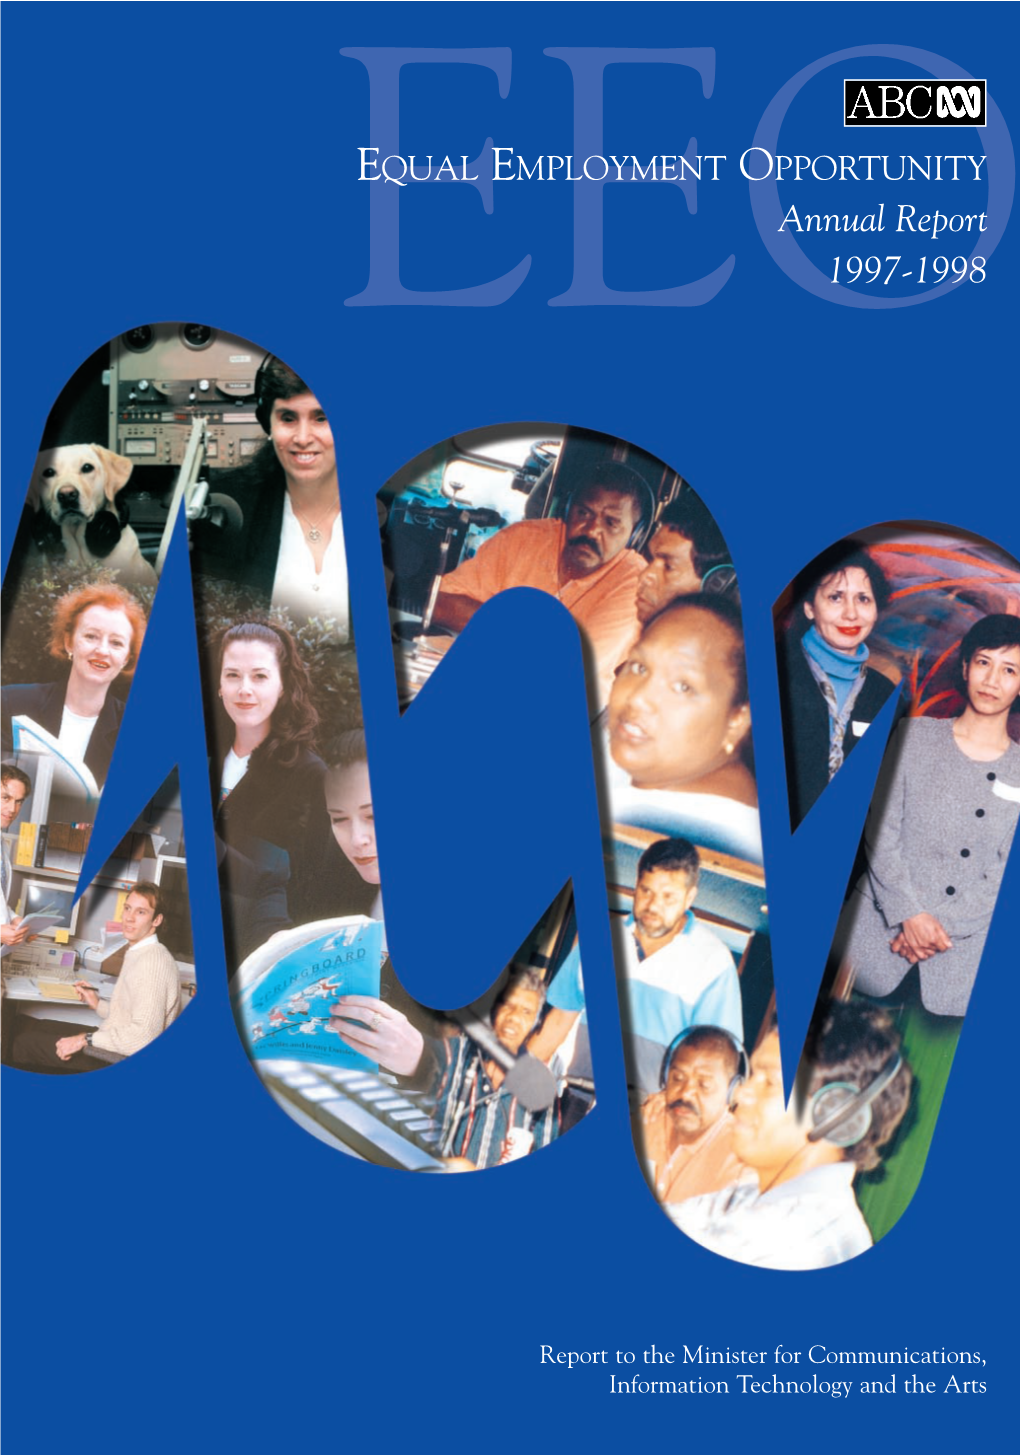 Equity Diversity Annual Report 1997-1998